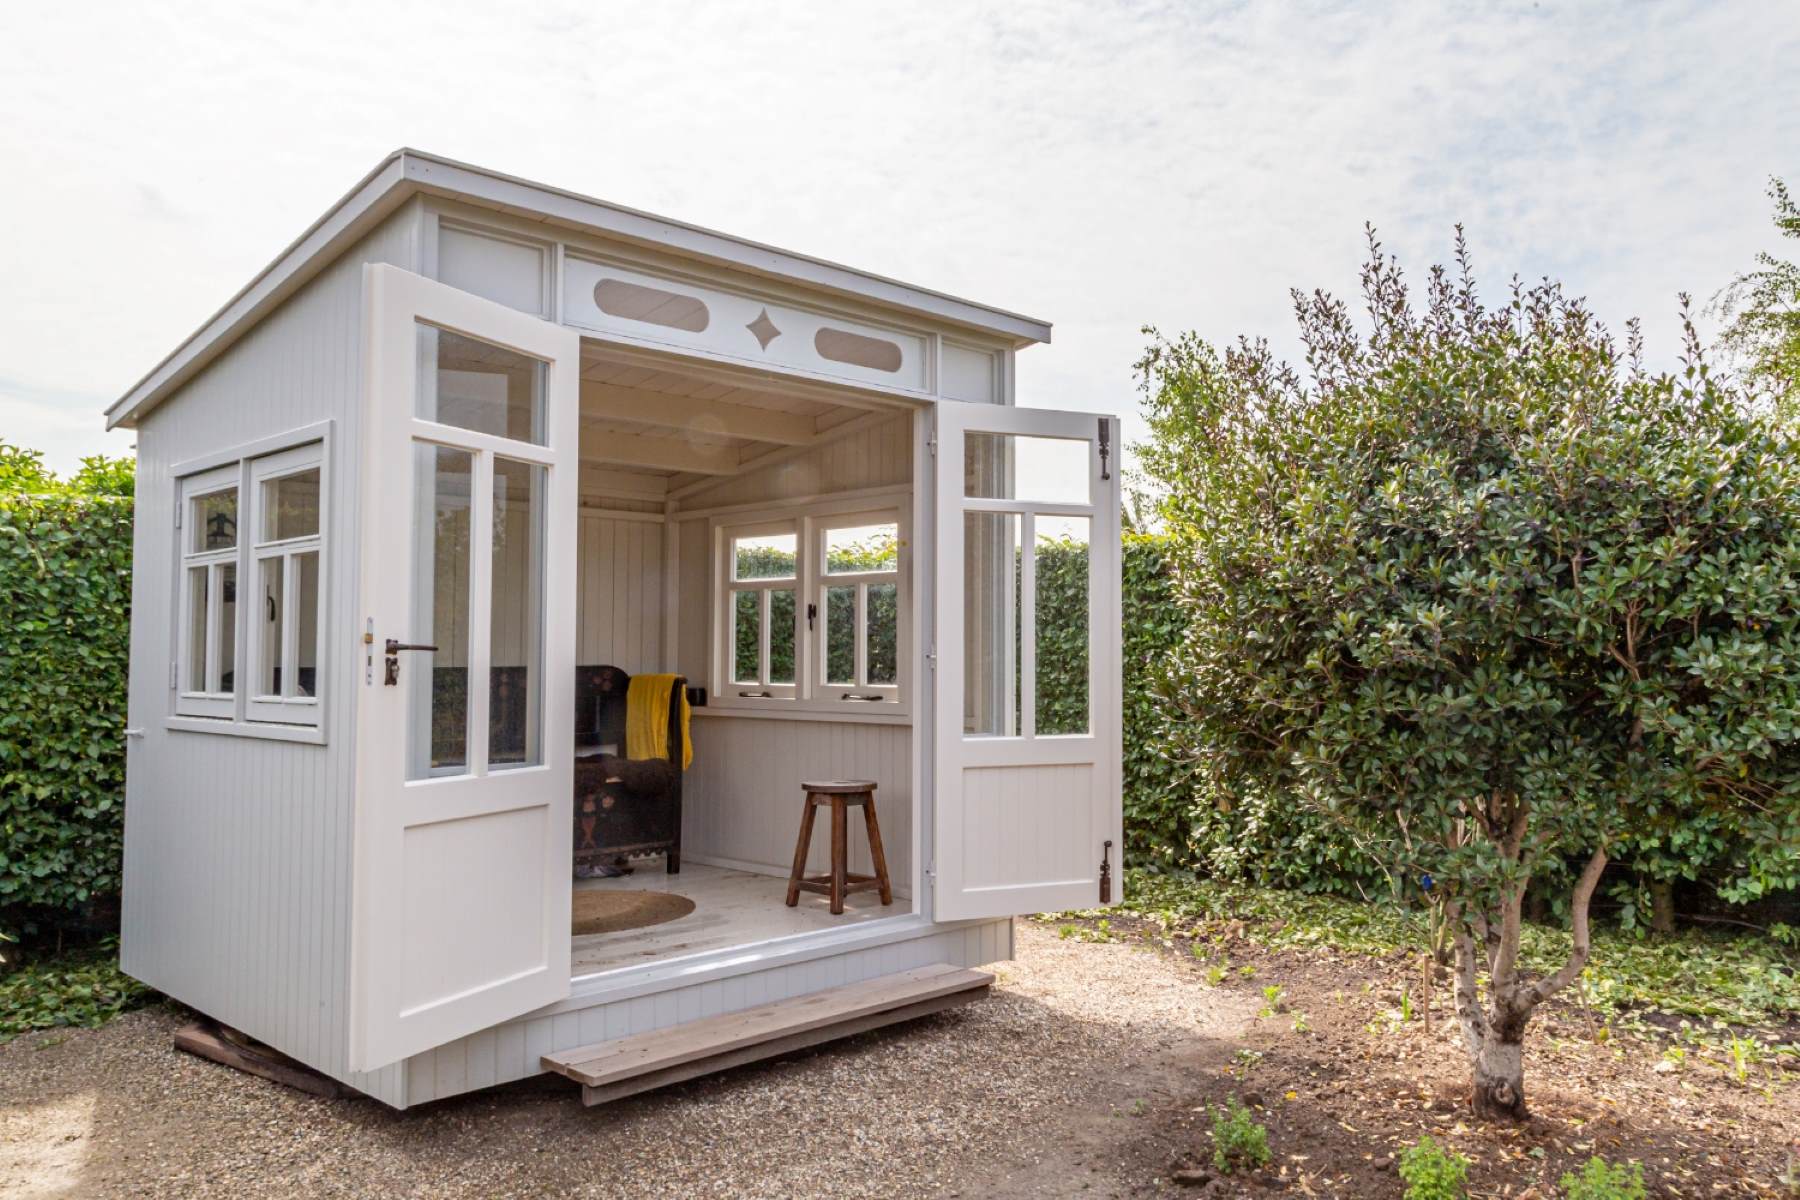 The Surprising Cost Of Building A 12x12 Shed Revealed!